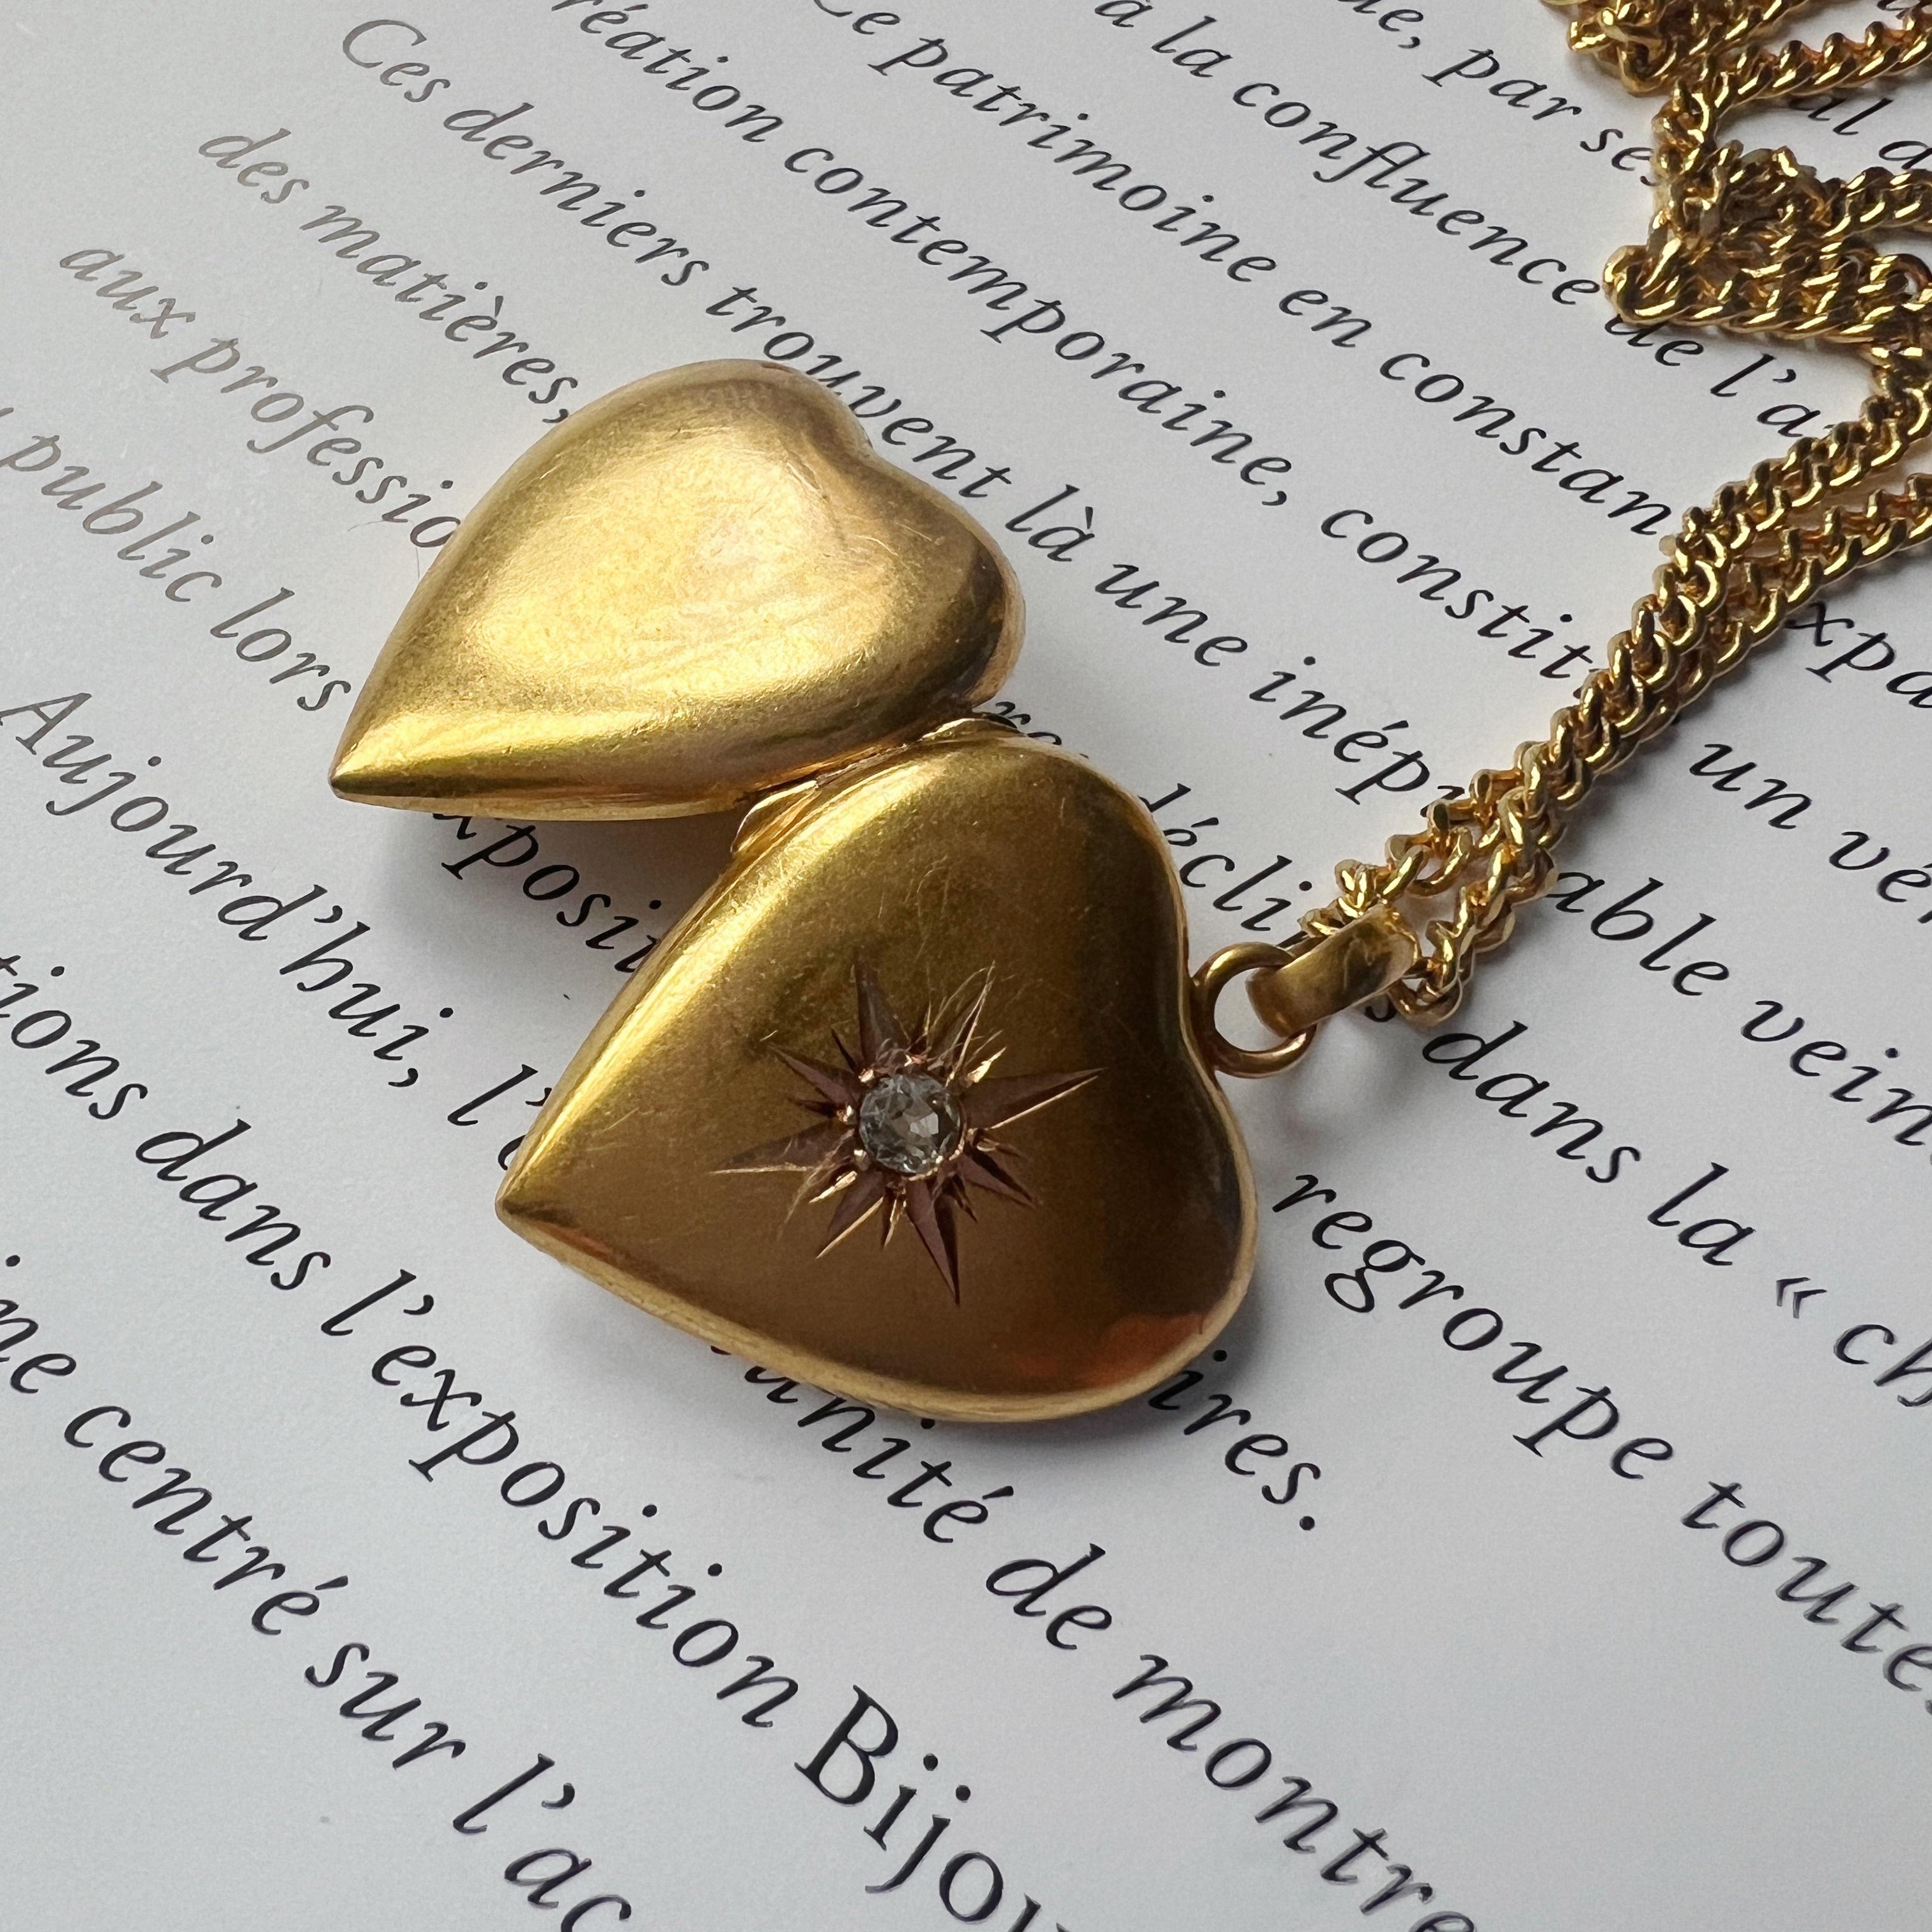 For sale a very sweet 18K gold heart-shaped photo locket pendant, a timeless piece that seamlessly blends romance and a touch of antique charm.

The pendant features a heart shape, symbolizing enduring love and commitment. Cast in warm, buttery 18K